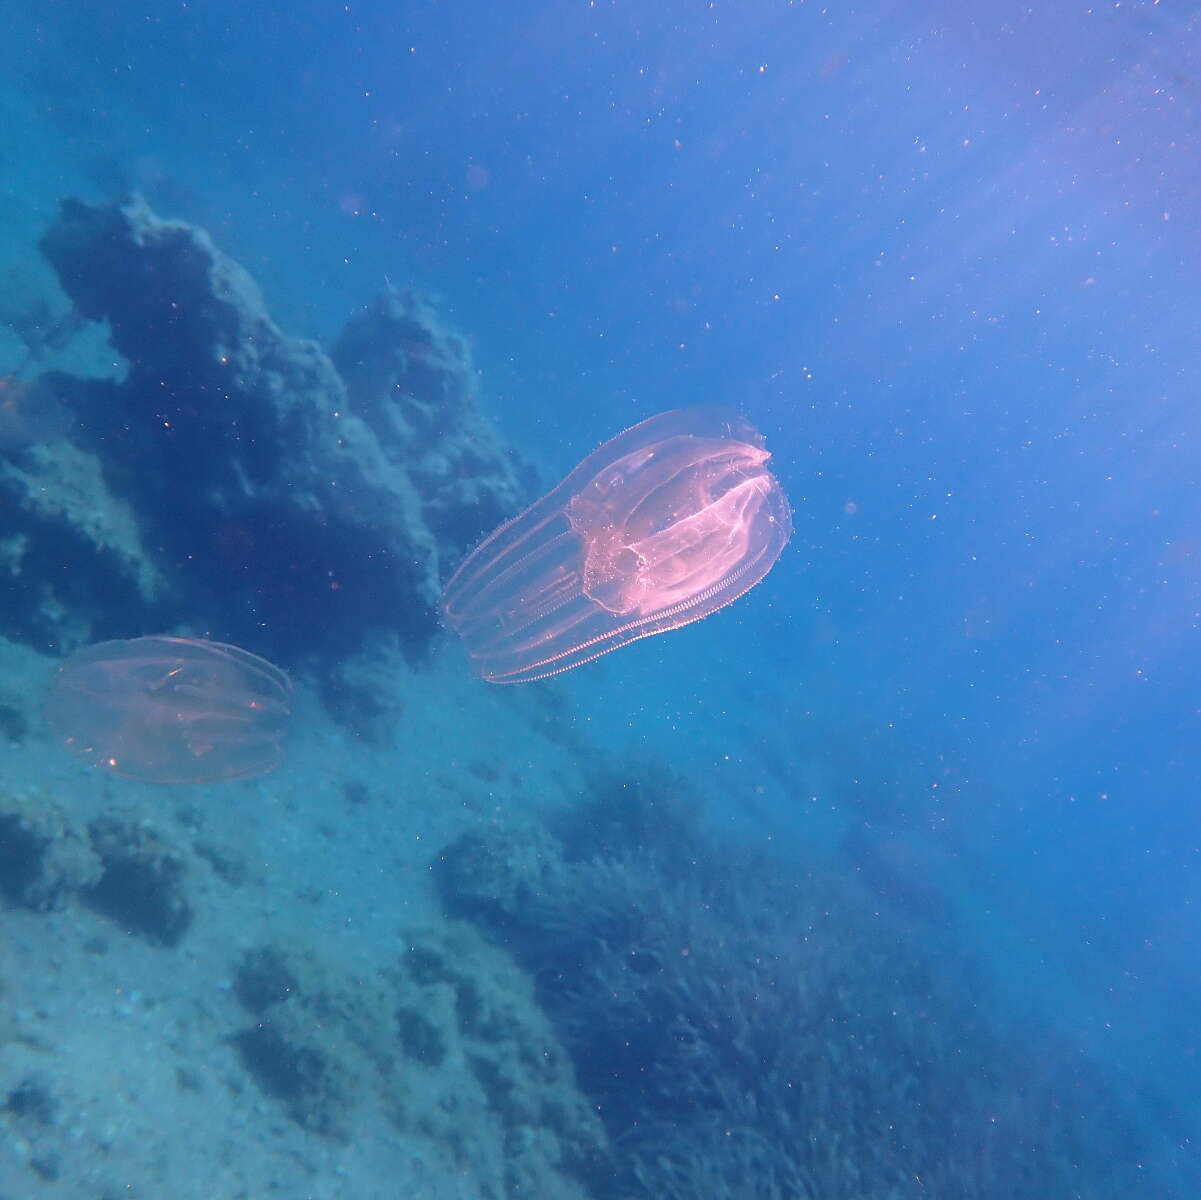 Image of vitreous lobate comb-jelly